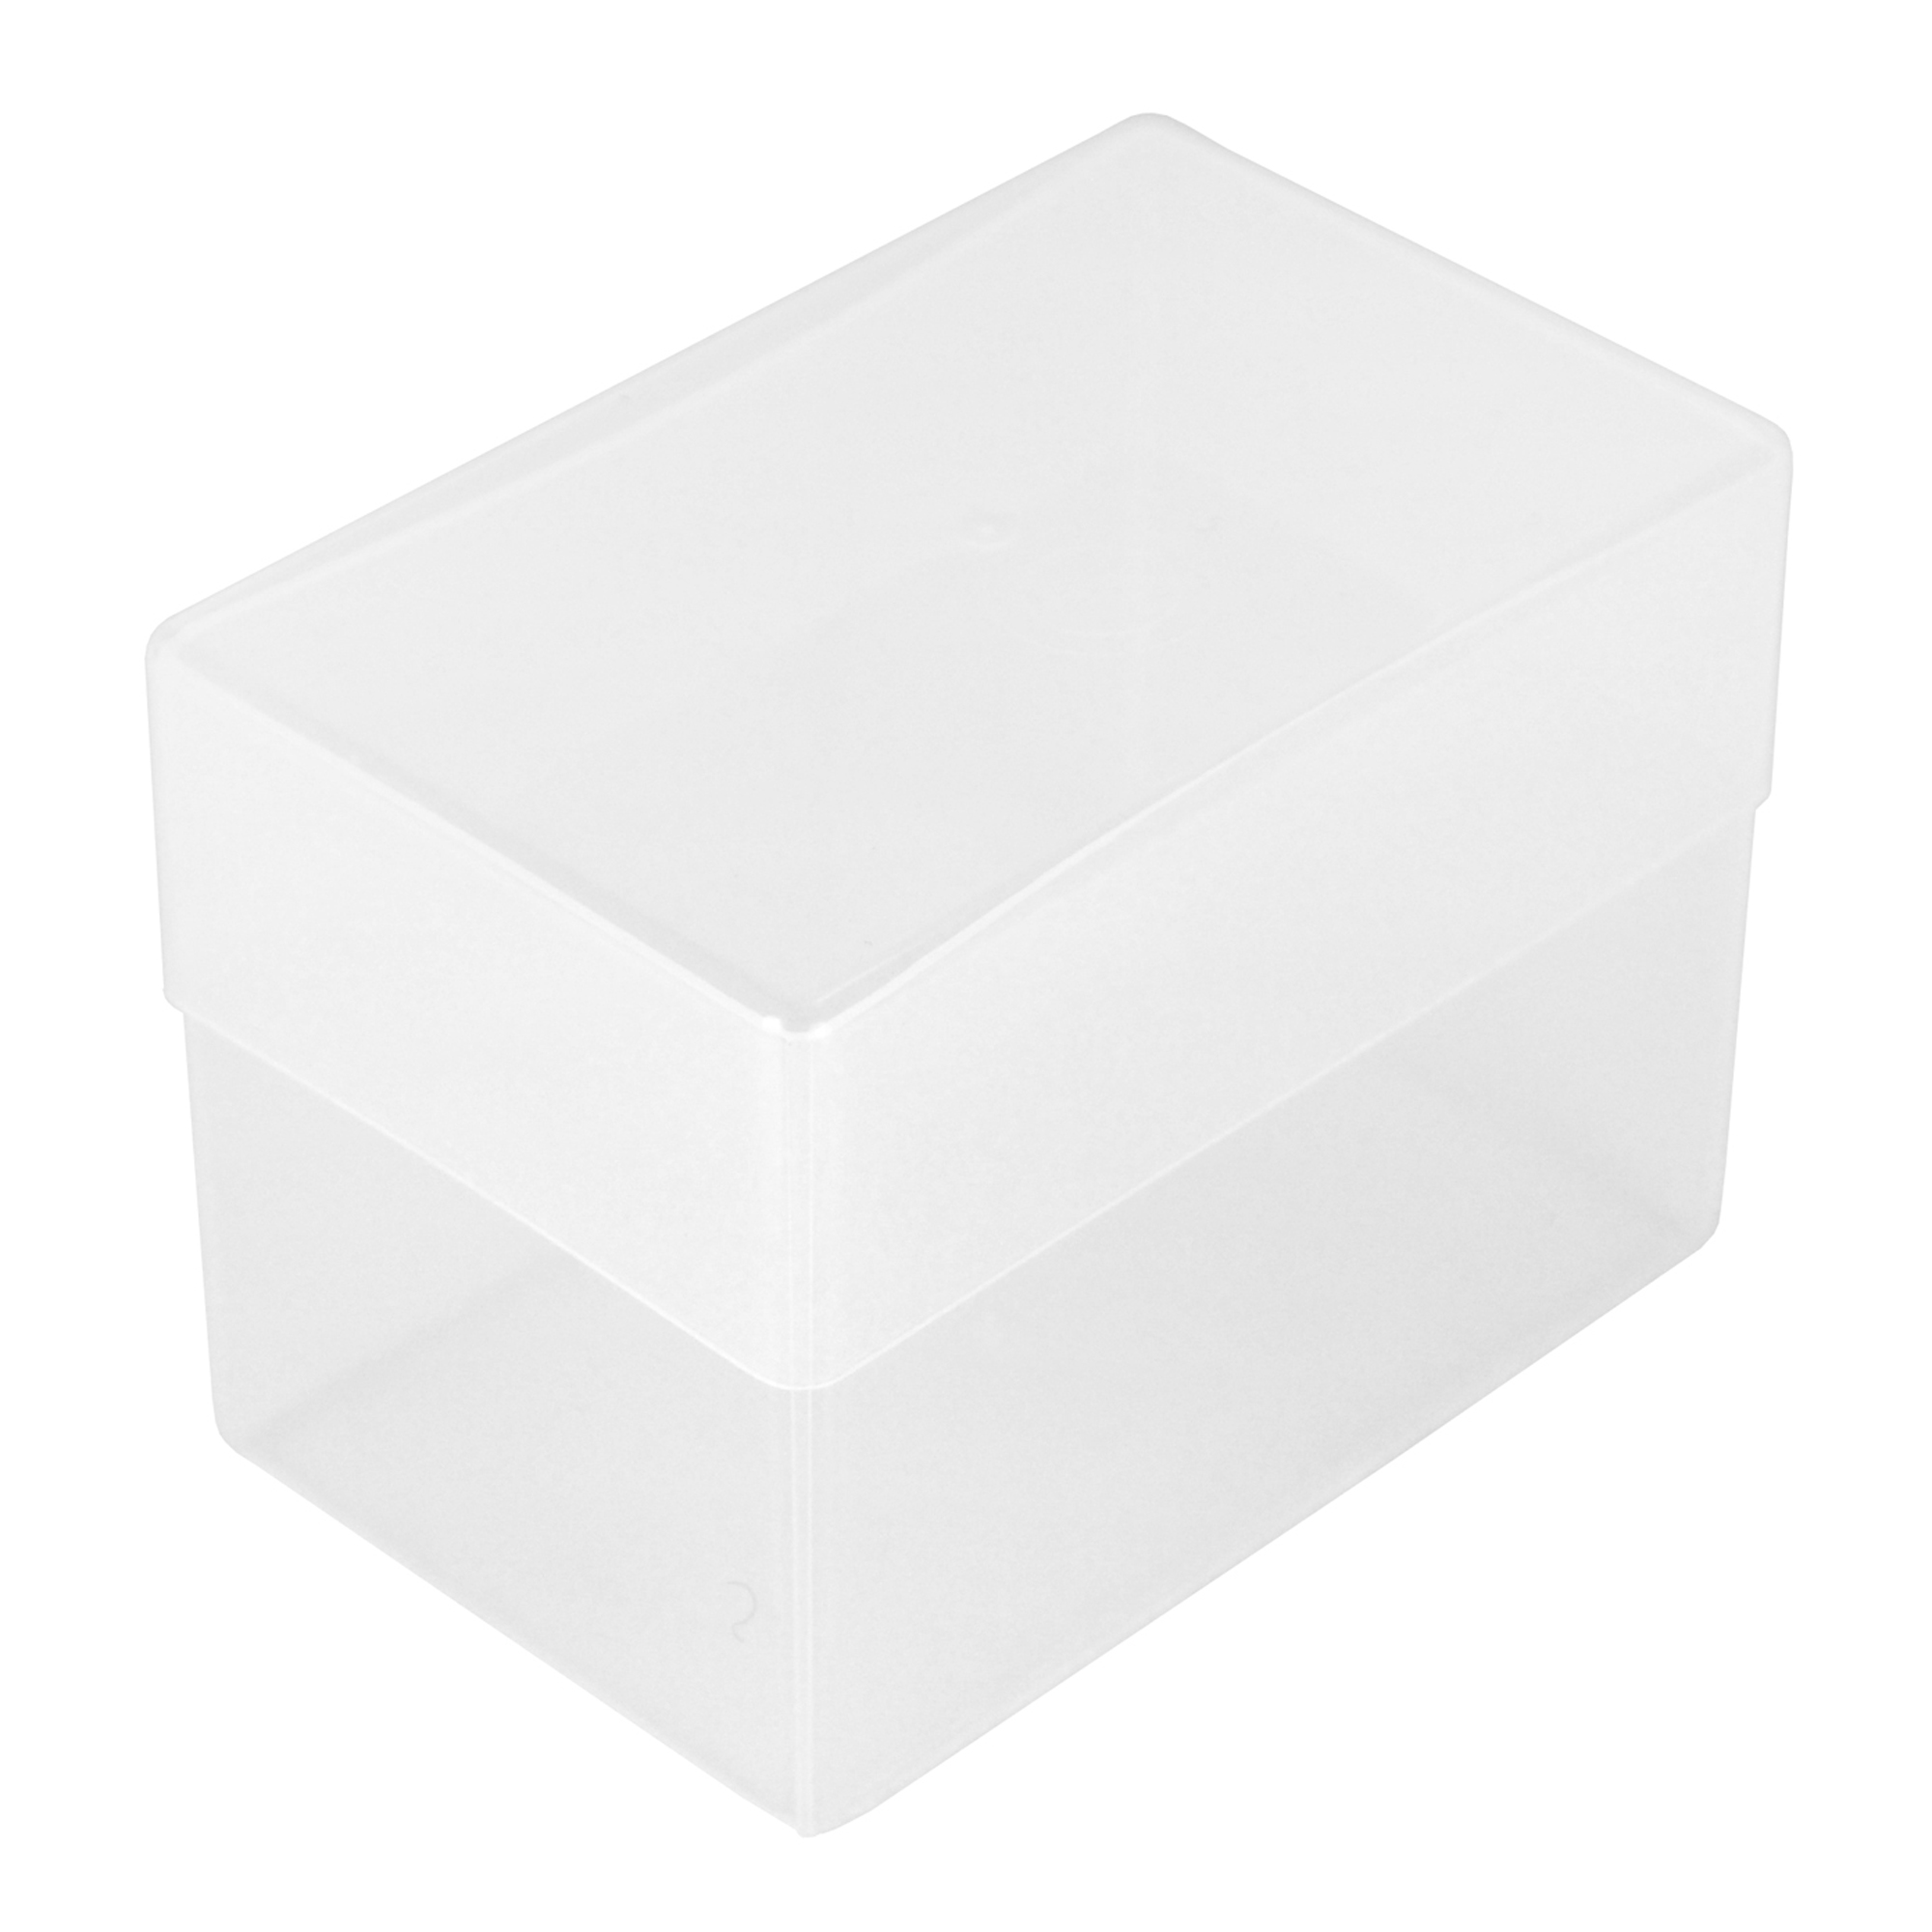 70mm Business Card Box, Clear, Transparent - Trade